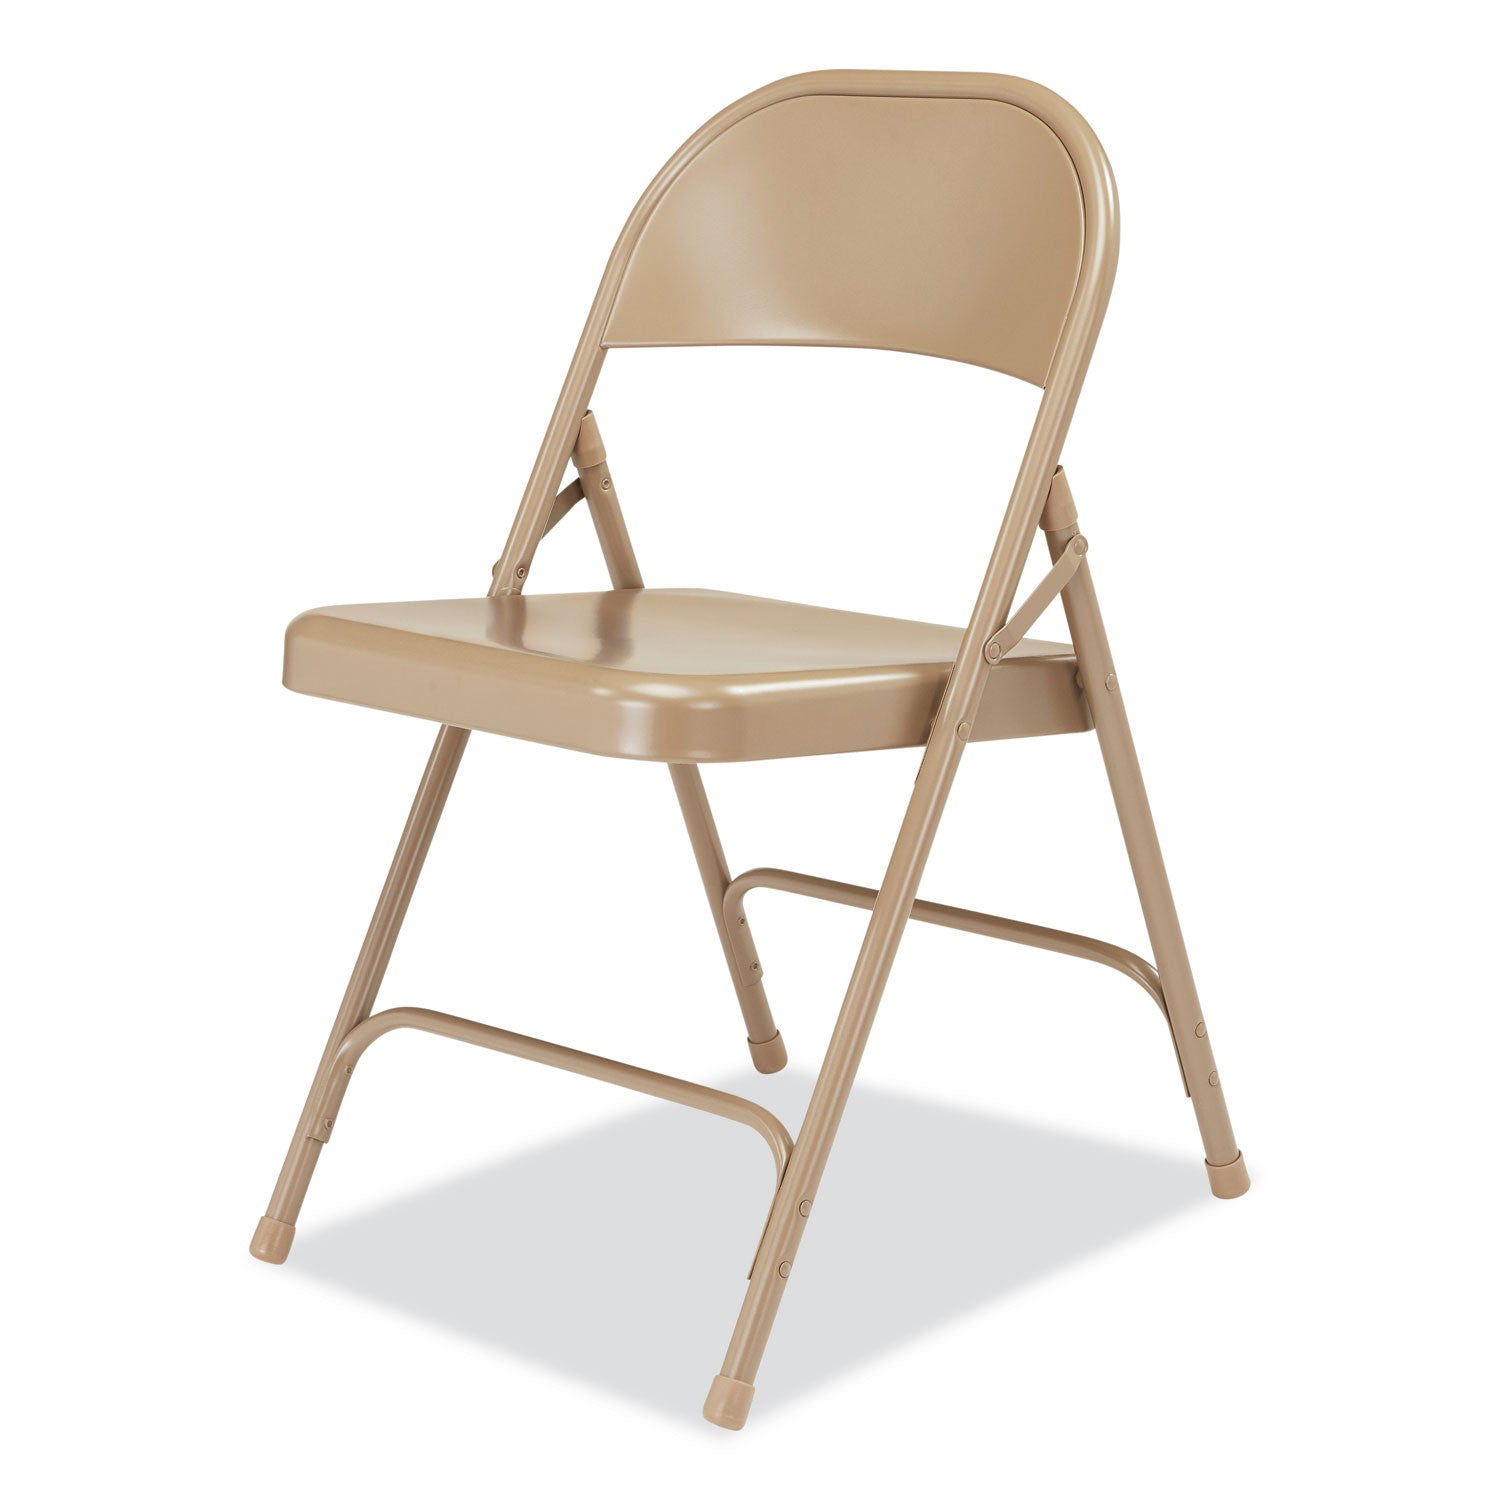 50-series-all-steel-folding-chair-supports-500-lb-1675-seat-ht-beige-seat-back-beige-base-4-ct-ships-in-1-3-bus-days_nps51 - 3